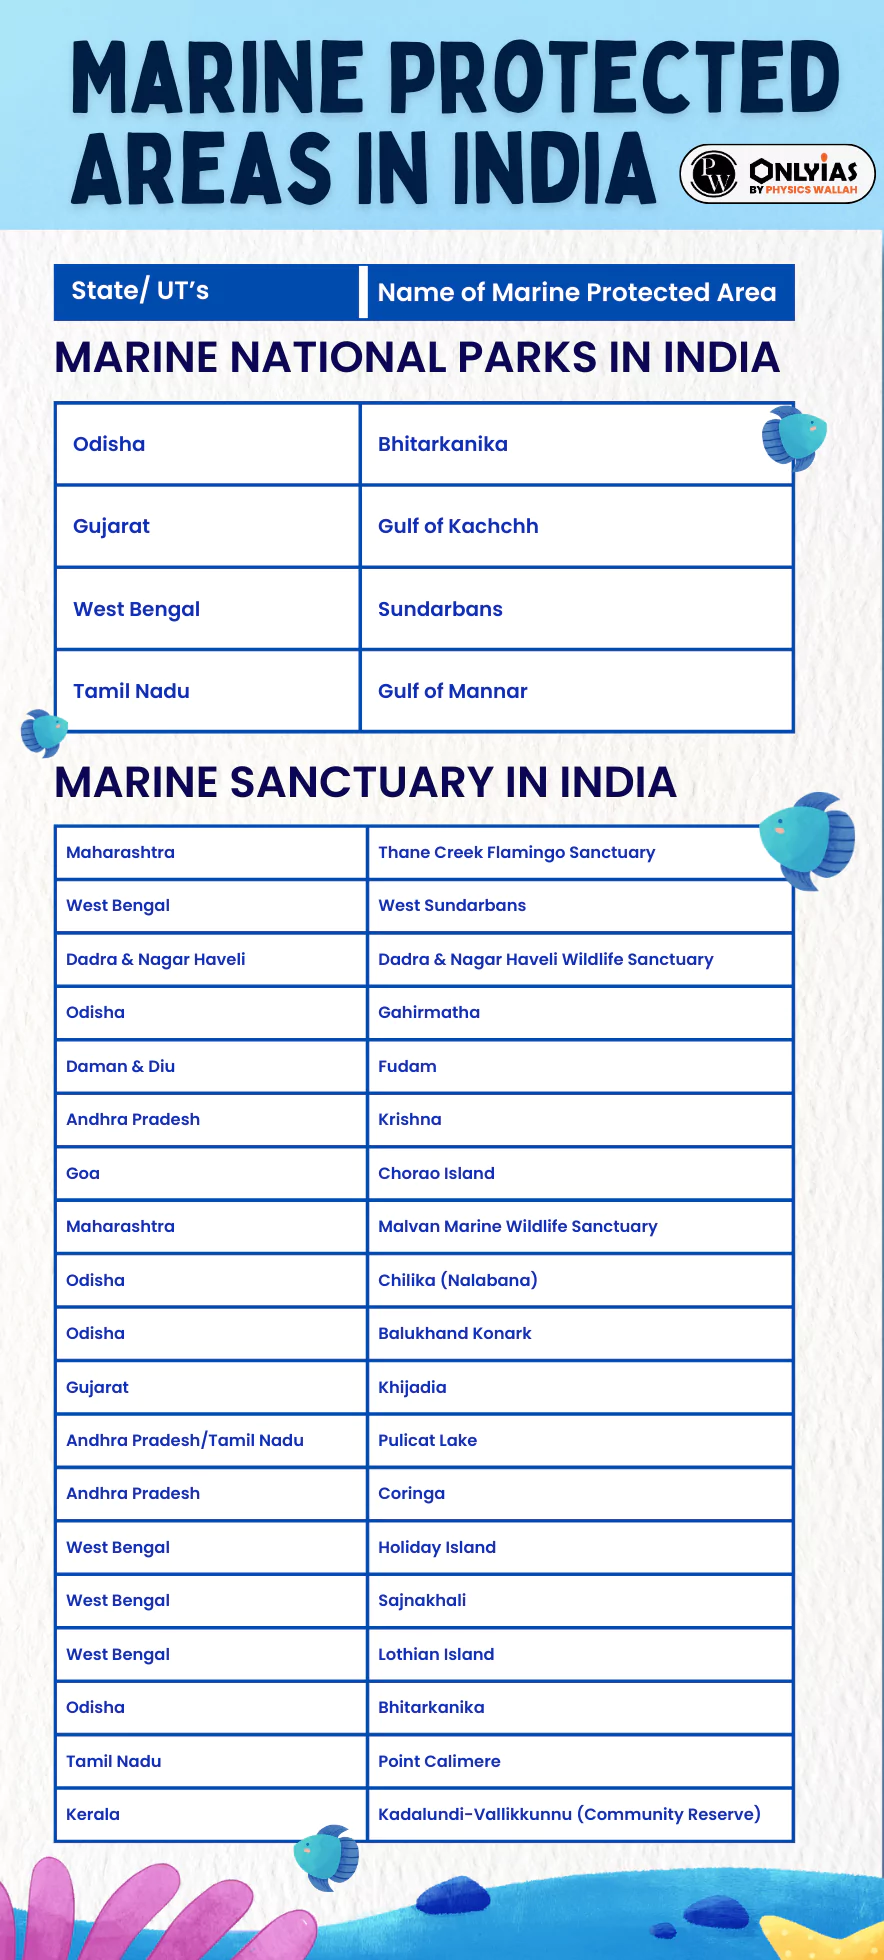 Marine Protected Areas in India